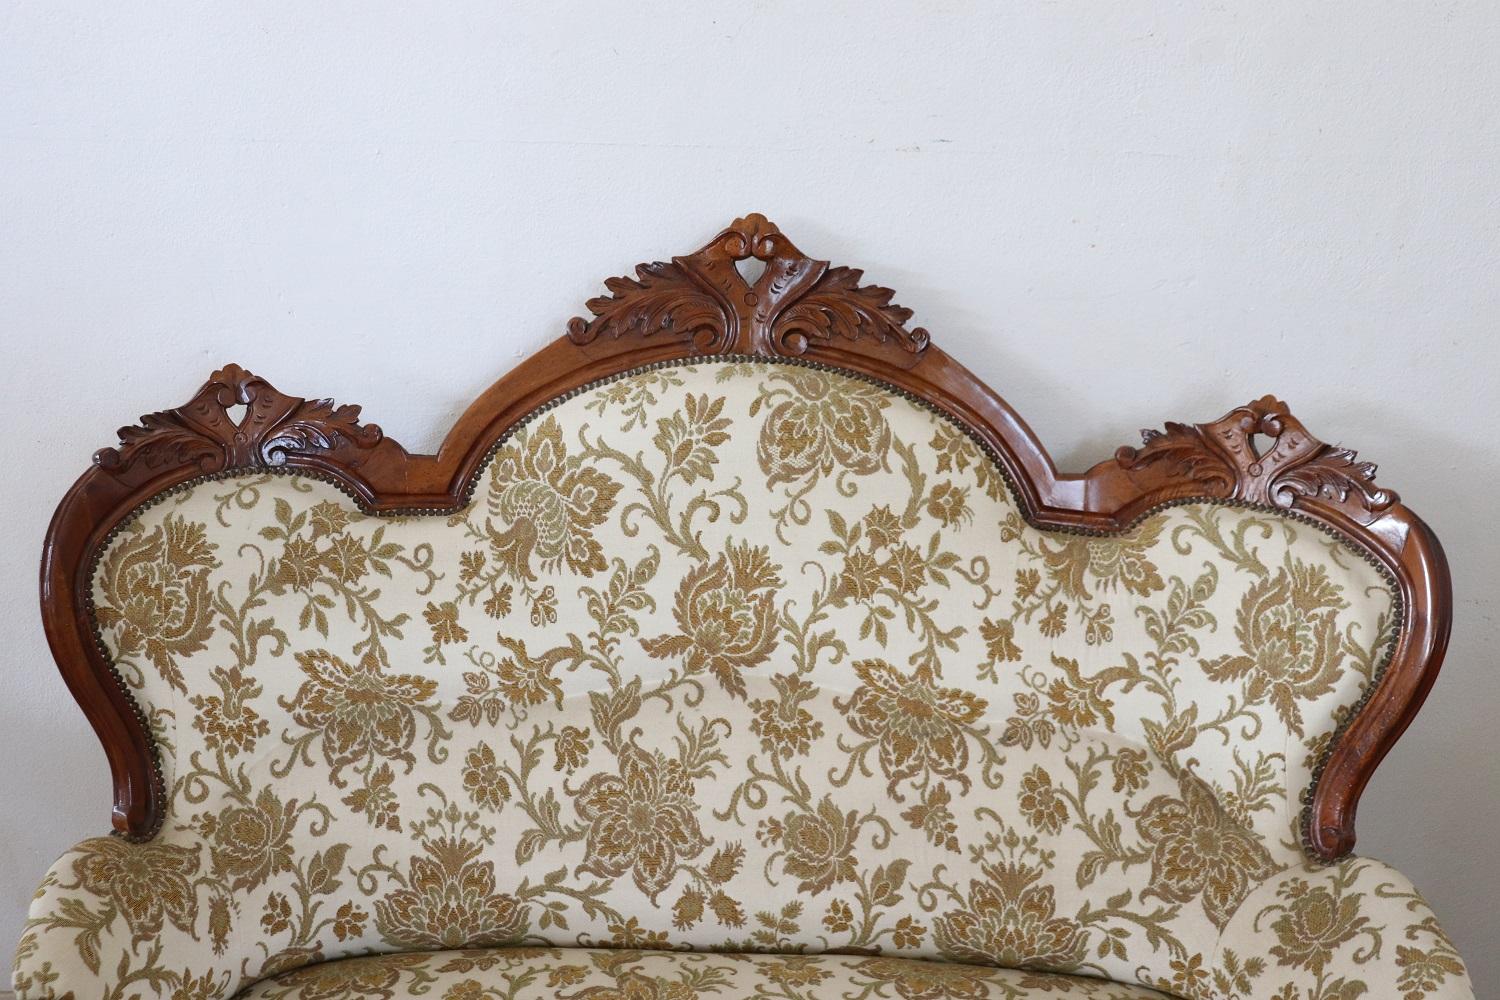 Rare complete Italian luxury Louis Philippe style 1930s living room set includes:
1 sofa
1 armchair
2 footrest

Refined living room set in carved walnut wood. The living room comes from an important Italian villa and embellished the room for